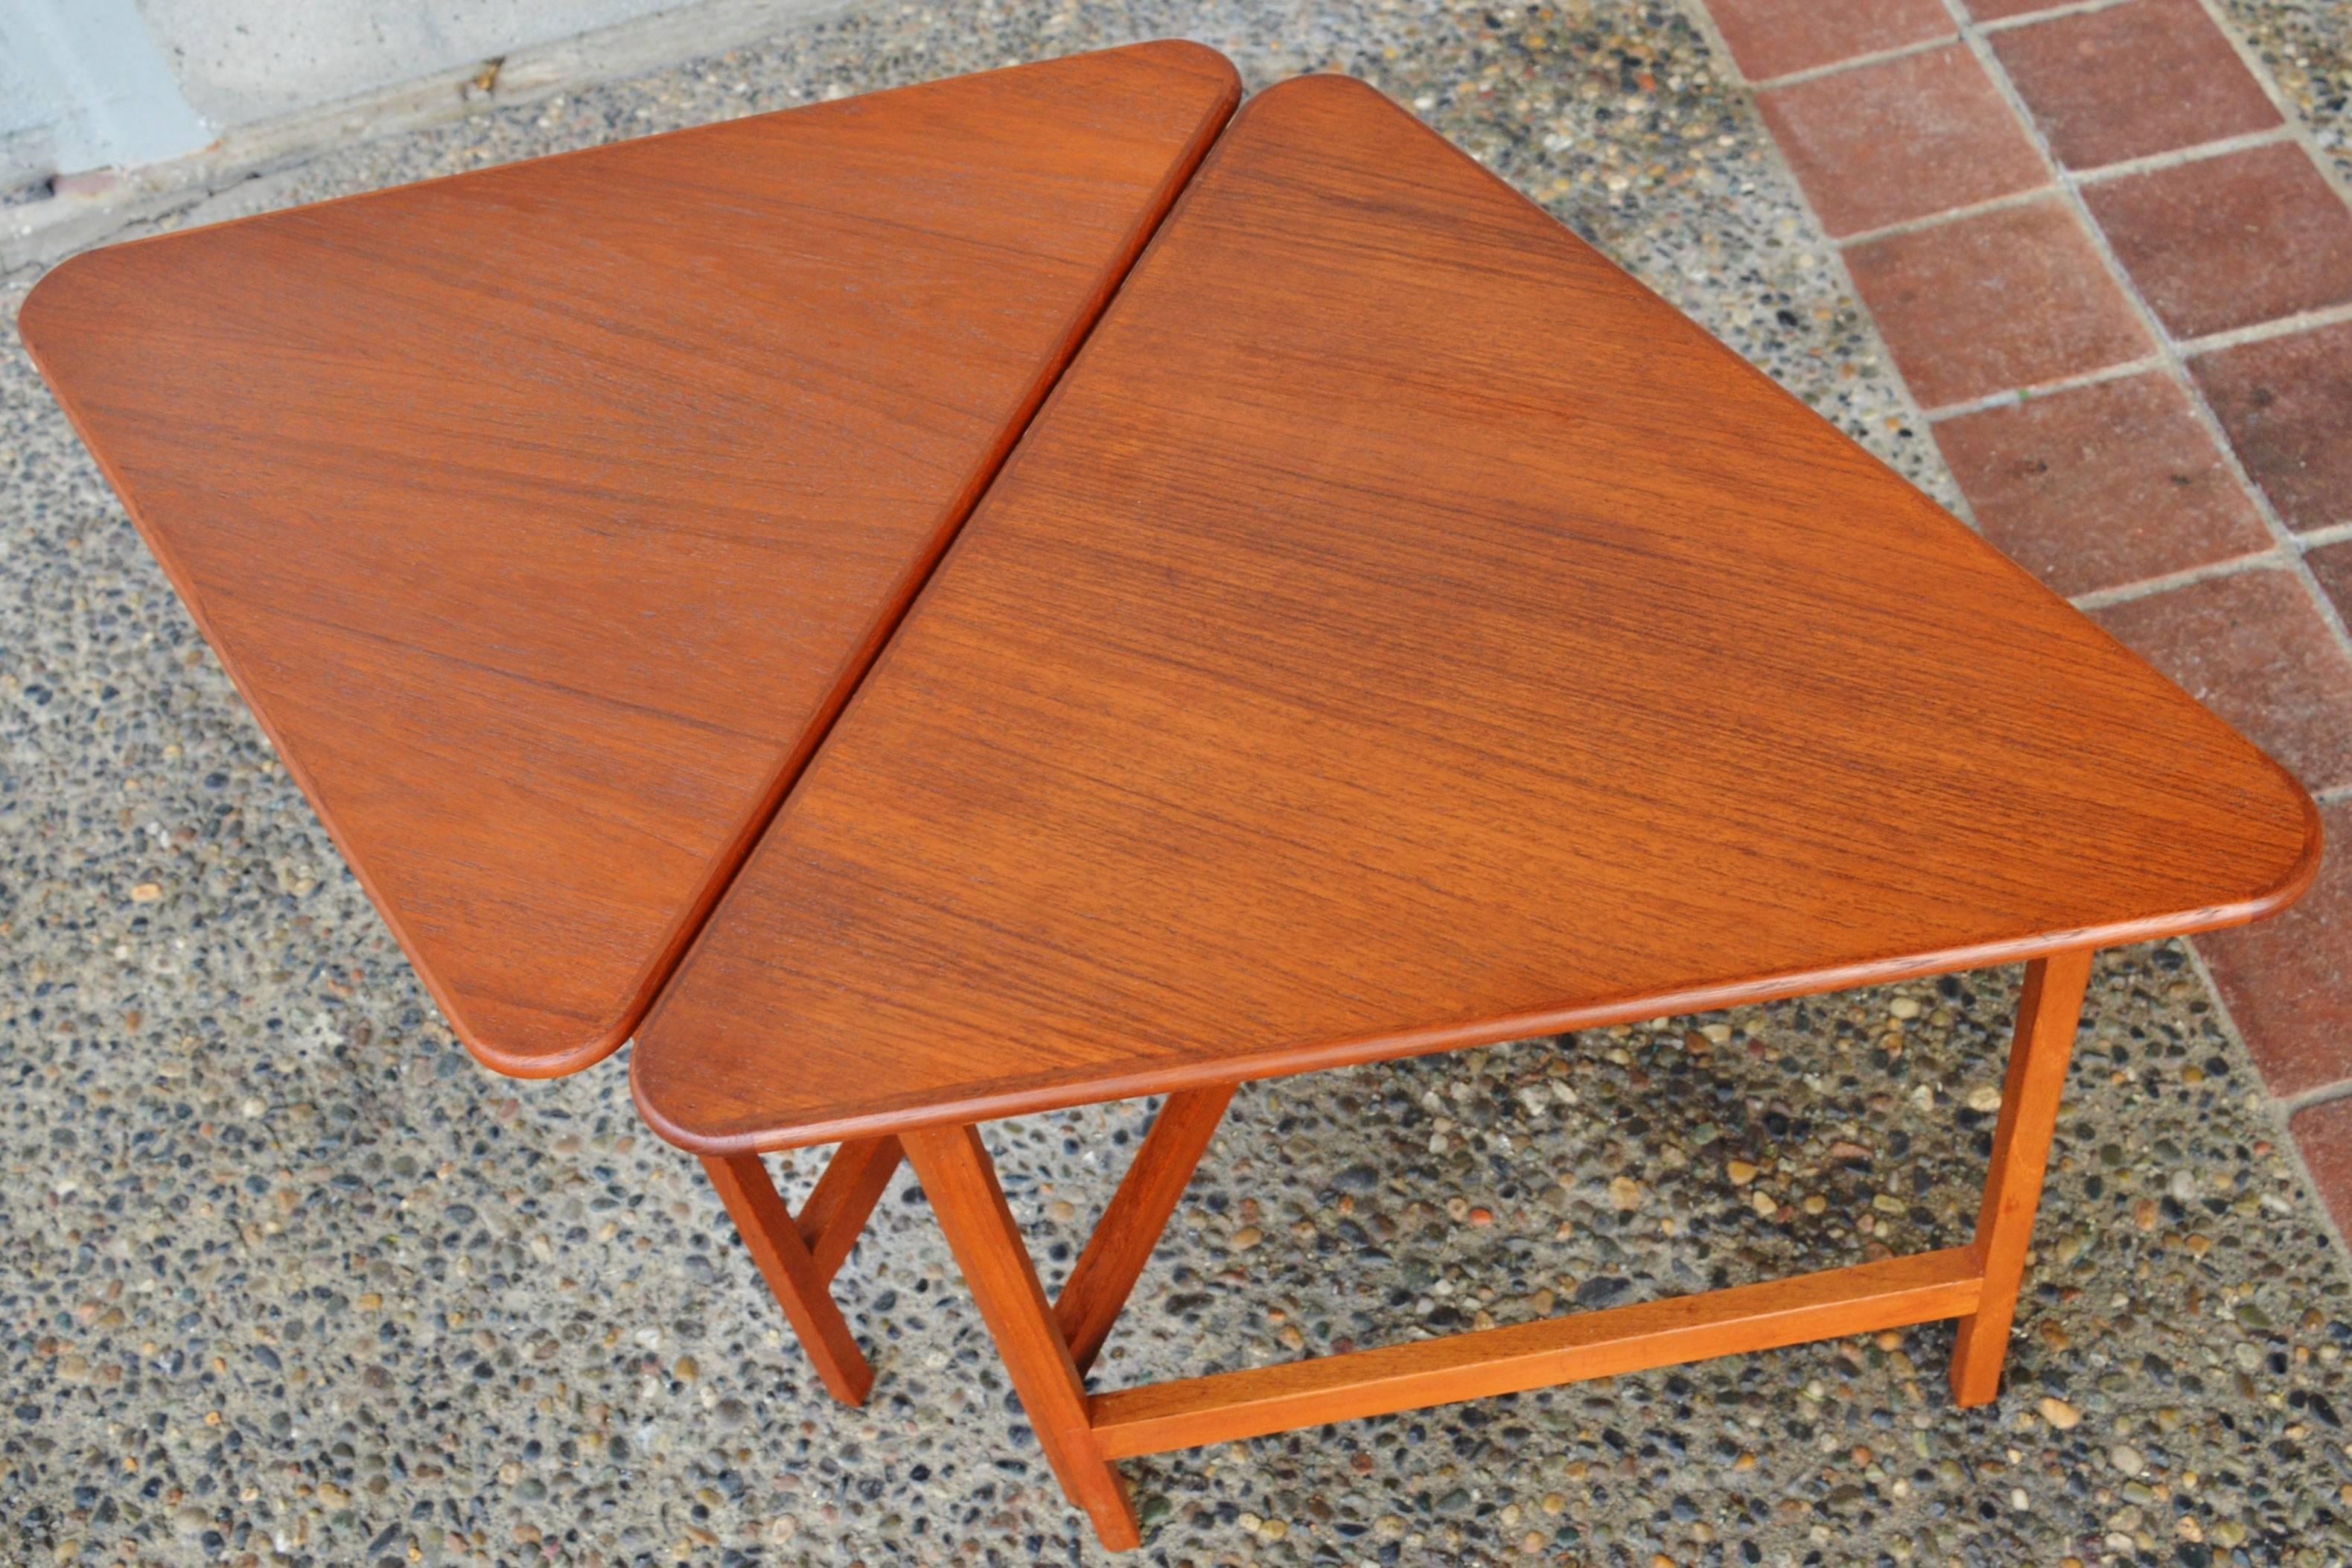 This totally fun pair of restored Danish modern teak folding tables are a clever design by Illum Wikkelsø. The tops are rounded triangles, and the legs fold out like a gate leg table with brass hinges, and a ball catch and stopper to hold them in